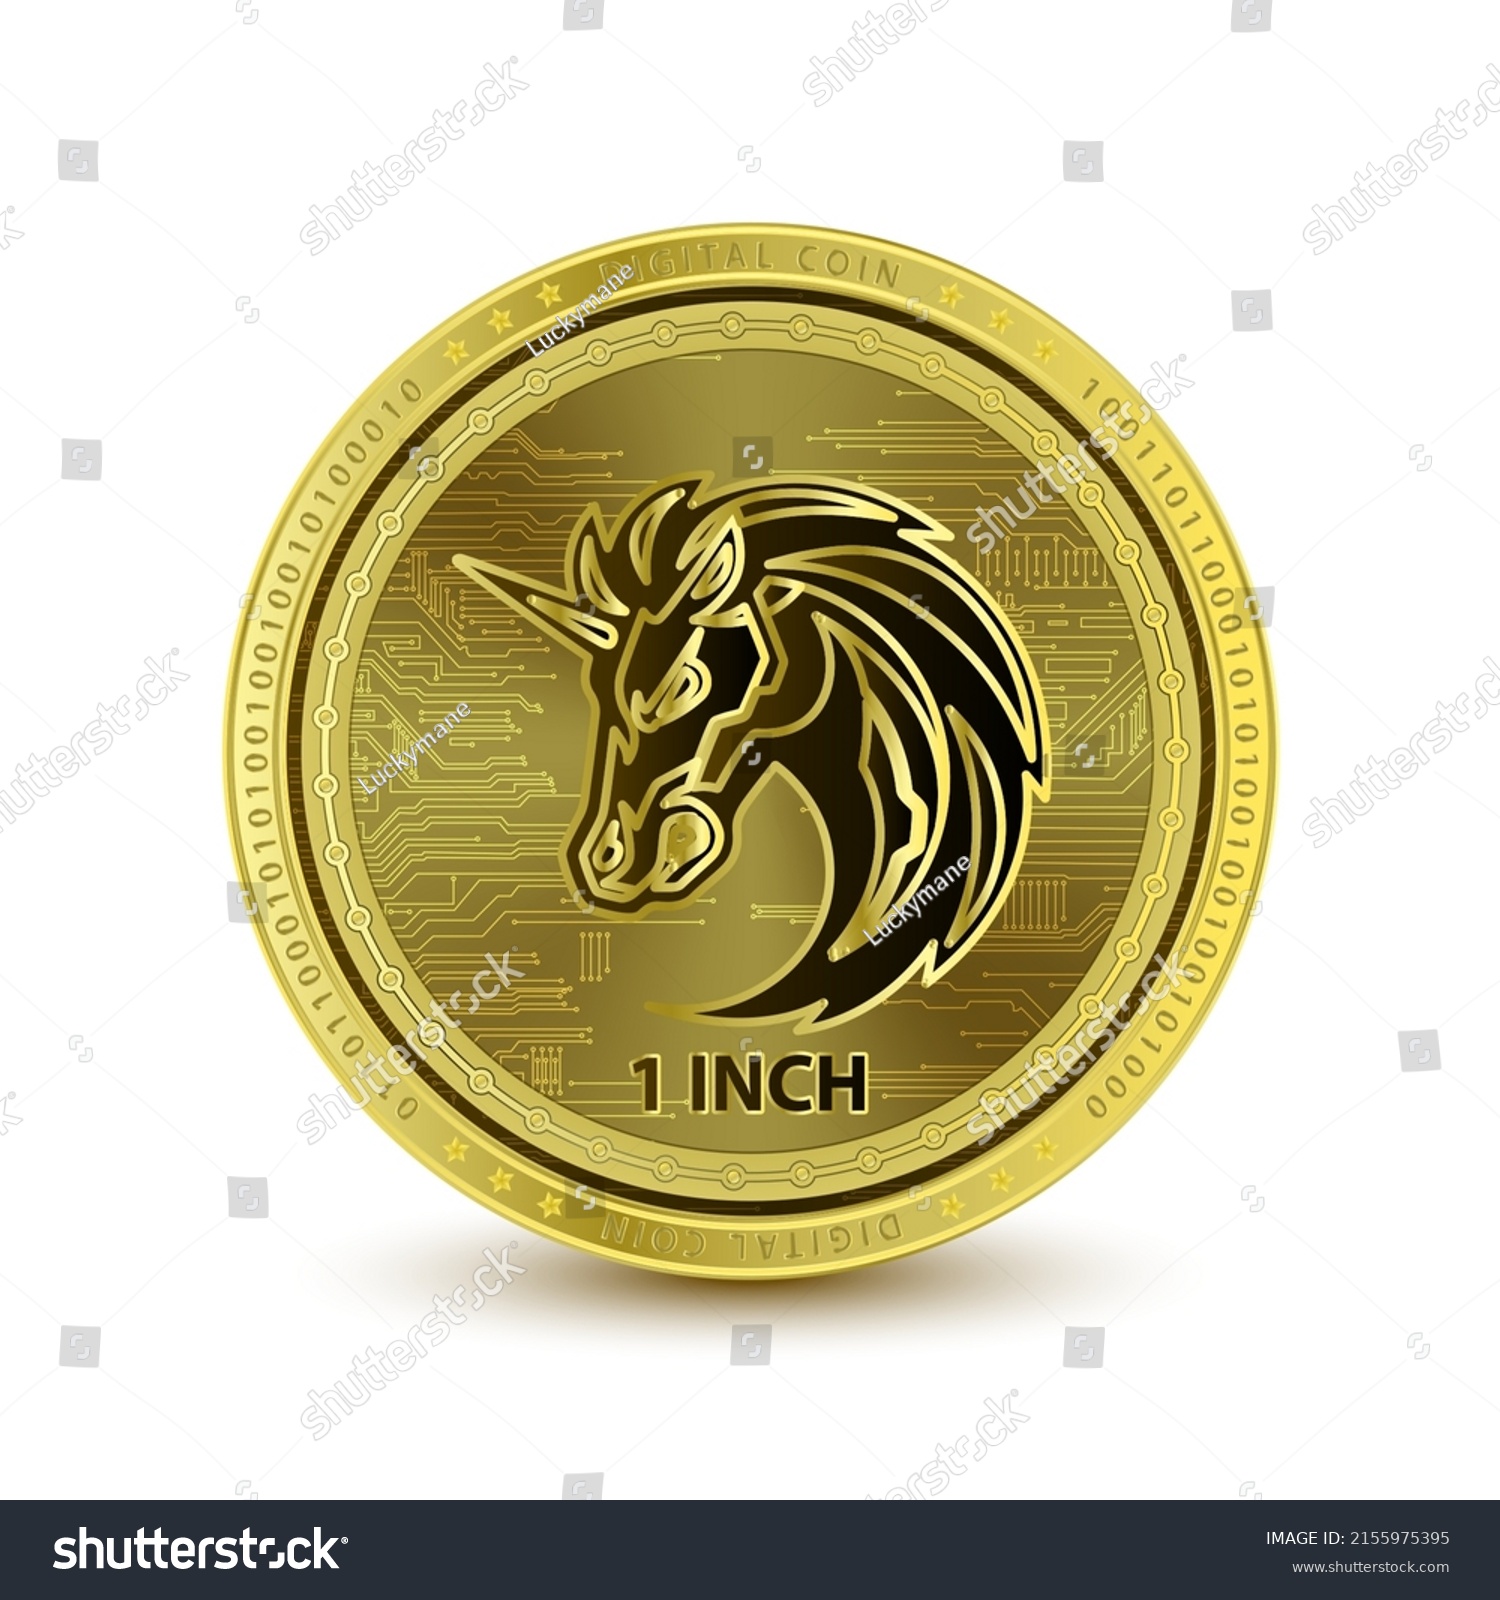 SVG of 1inch (1INCH) coin isolated on white background. Cryptocurrency blockchain (crypto currency) digital currency alternative currency. 3D Vector illustration. Symbol of business modern gold, money. svg